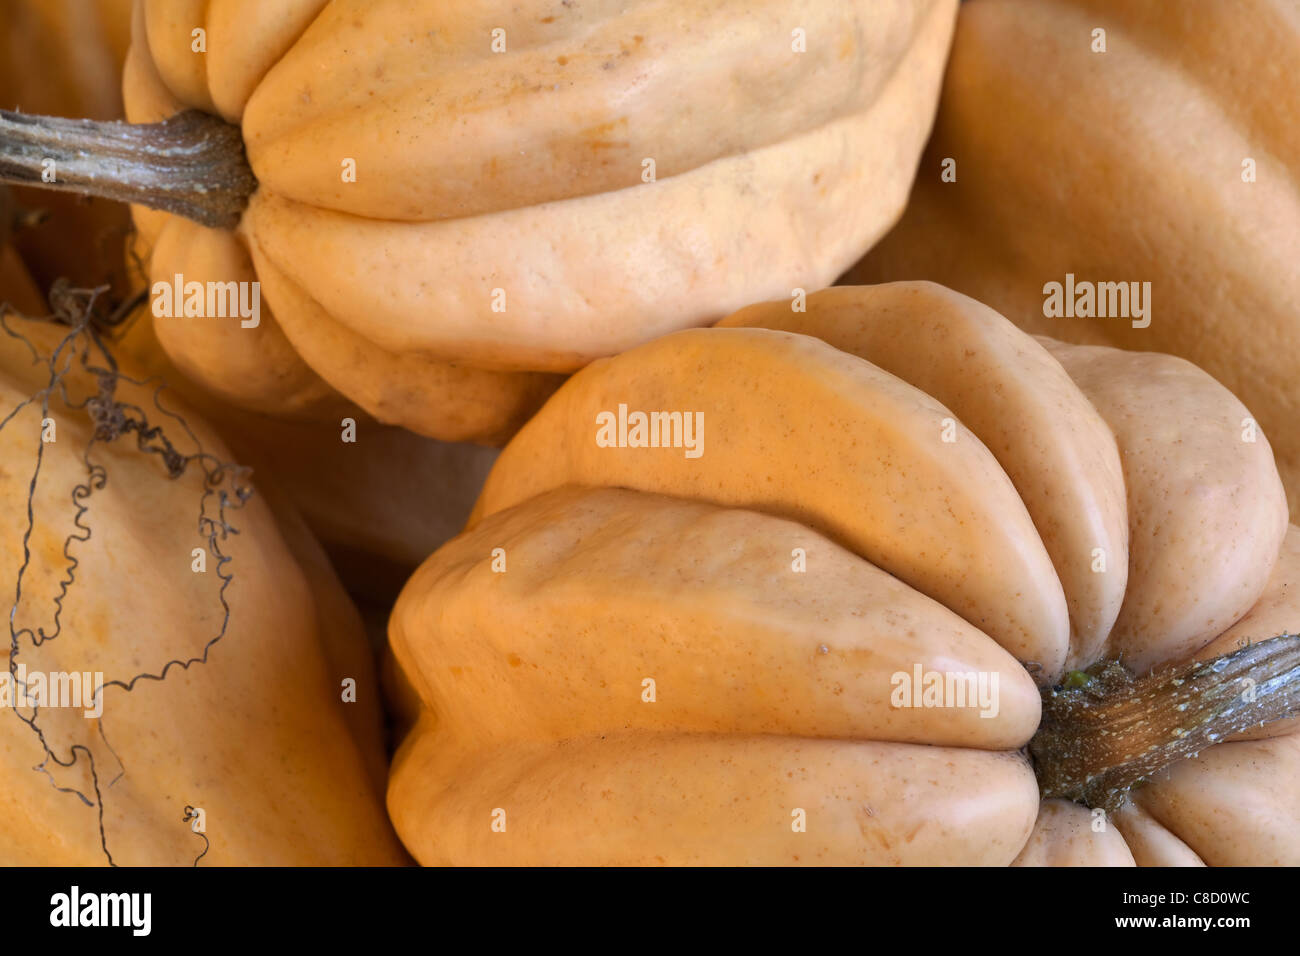 A close up of a Thelma Saunders vegetable squash Stock Photo